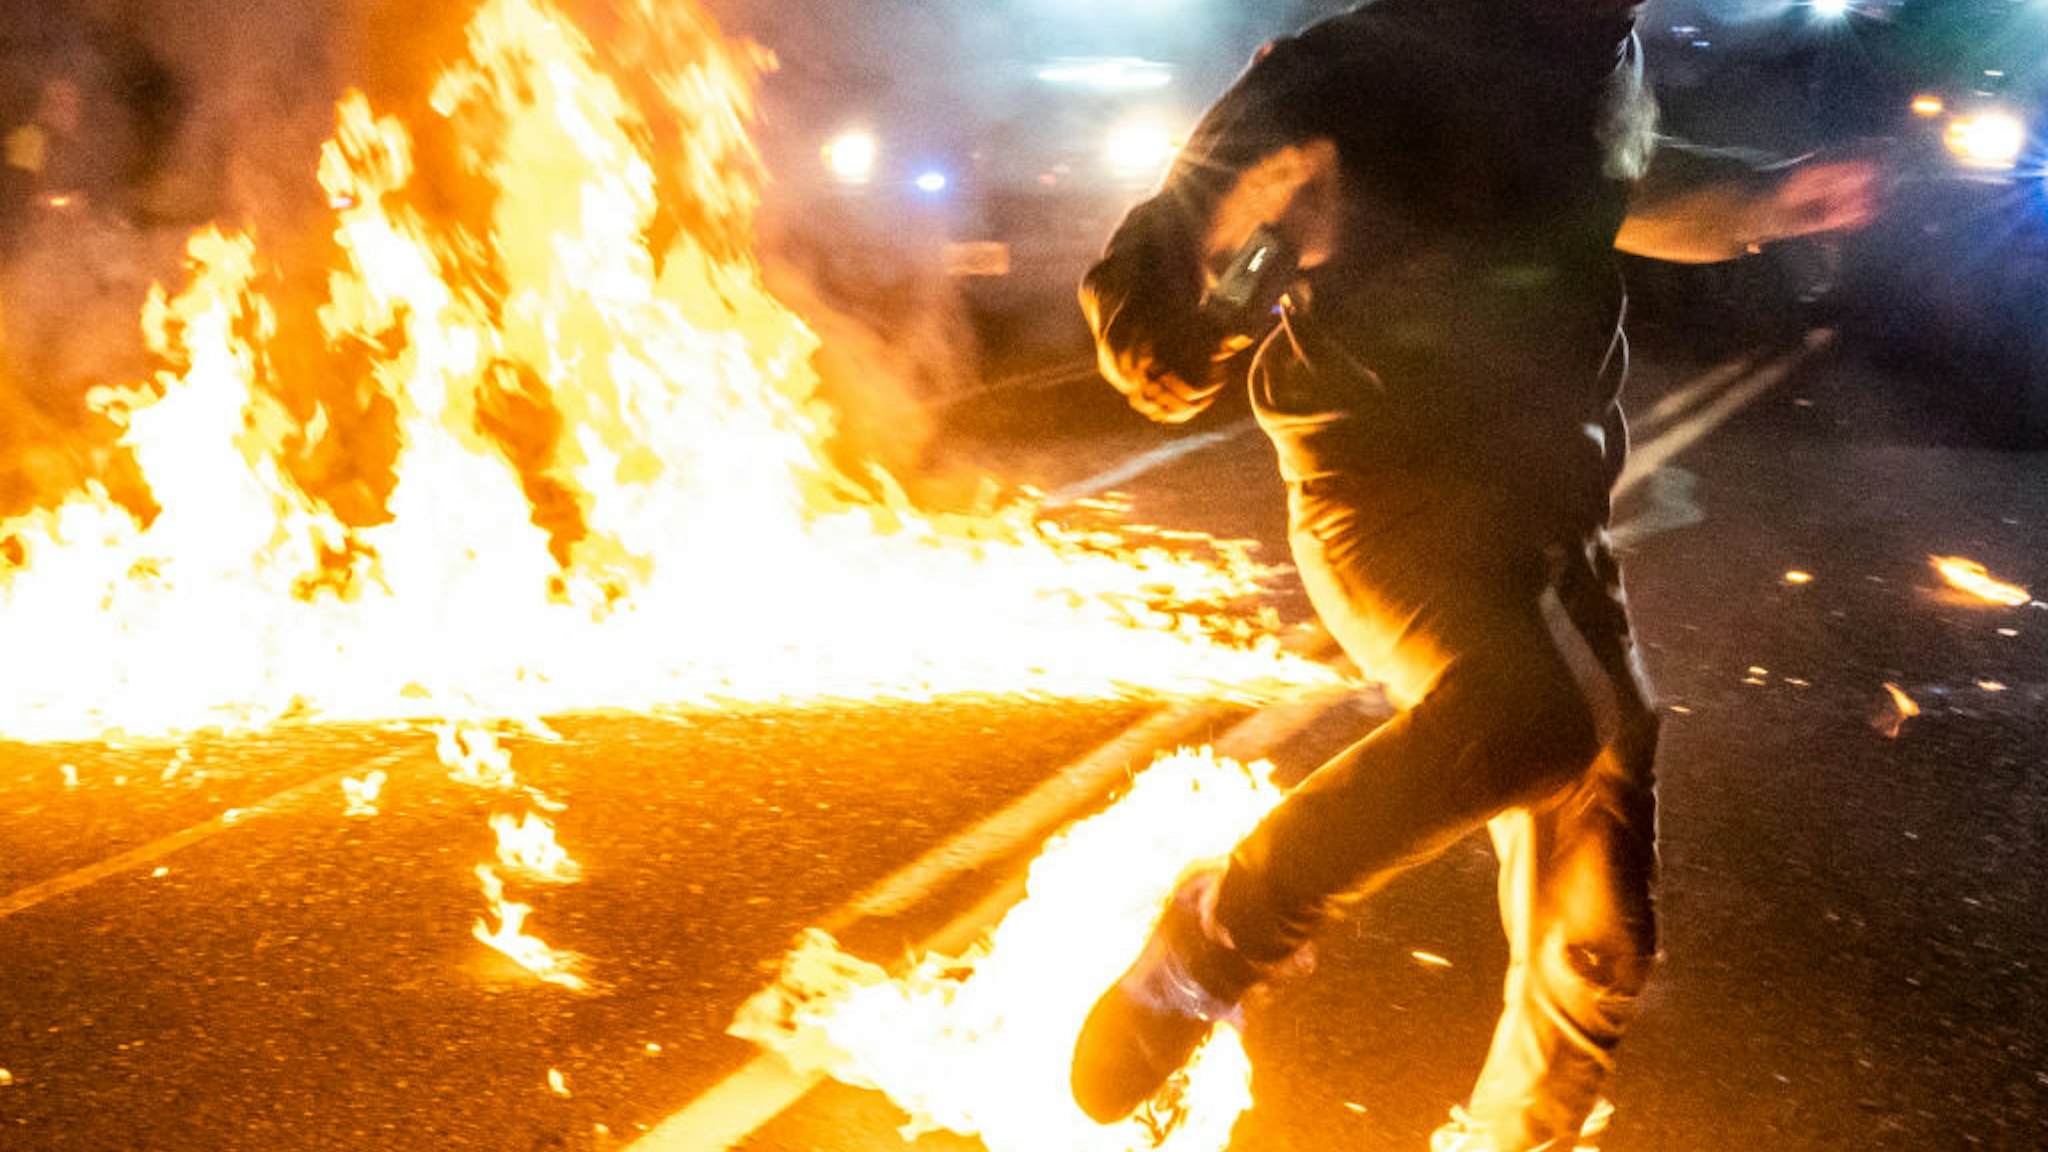 A protester, whos feet caught fire after a molotov cocktail exploded on him, runs toward a medic during a protest against police brutality and racial injustice on September 5, 2020 in Portland, Oregon. Portland has seen